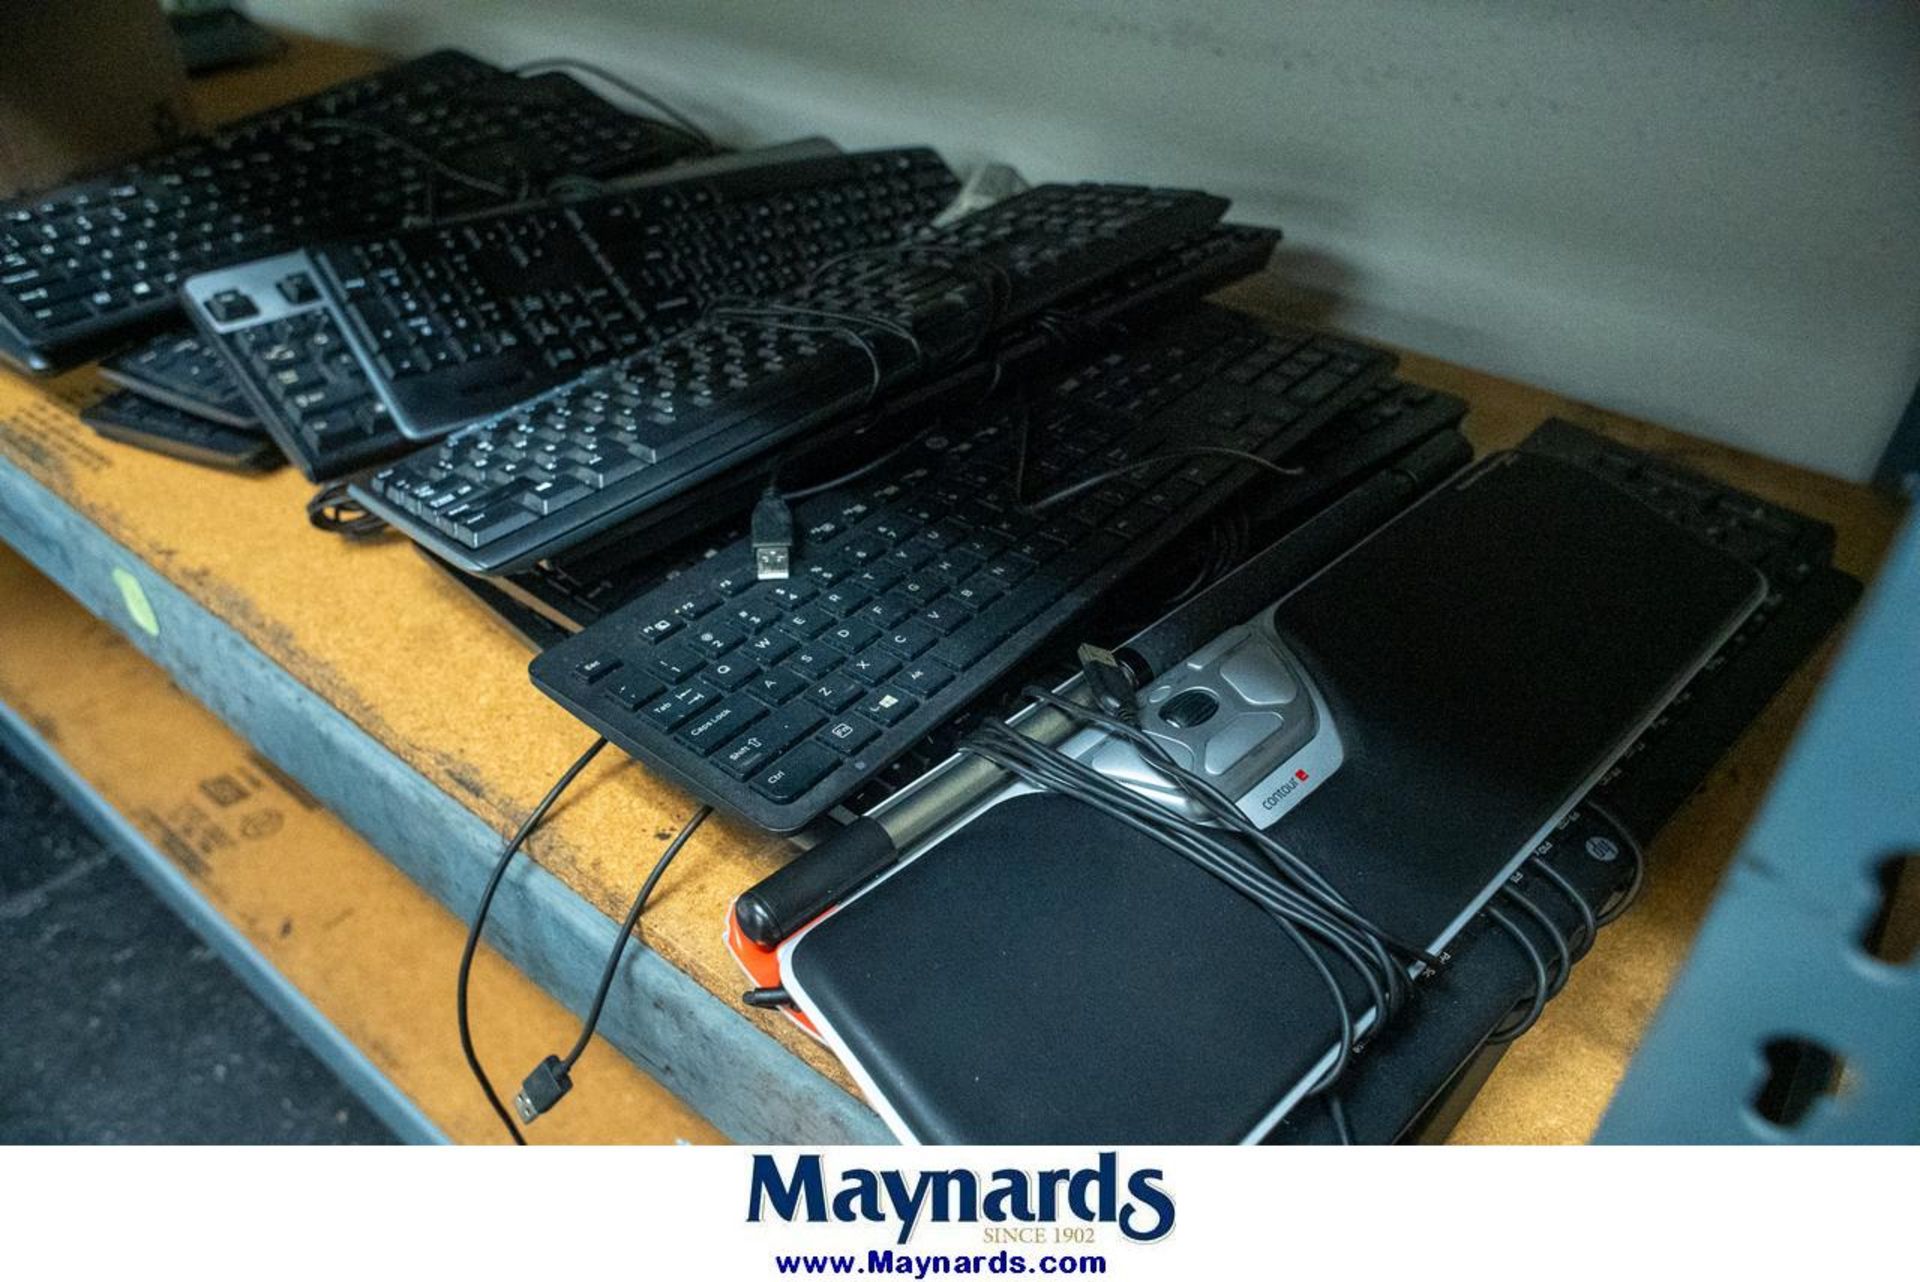 Lot of Various Keyboards - Image 2 of 4